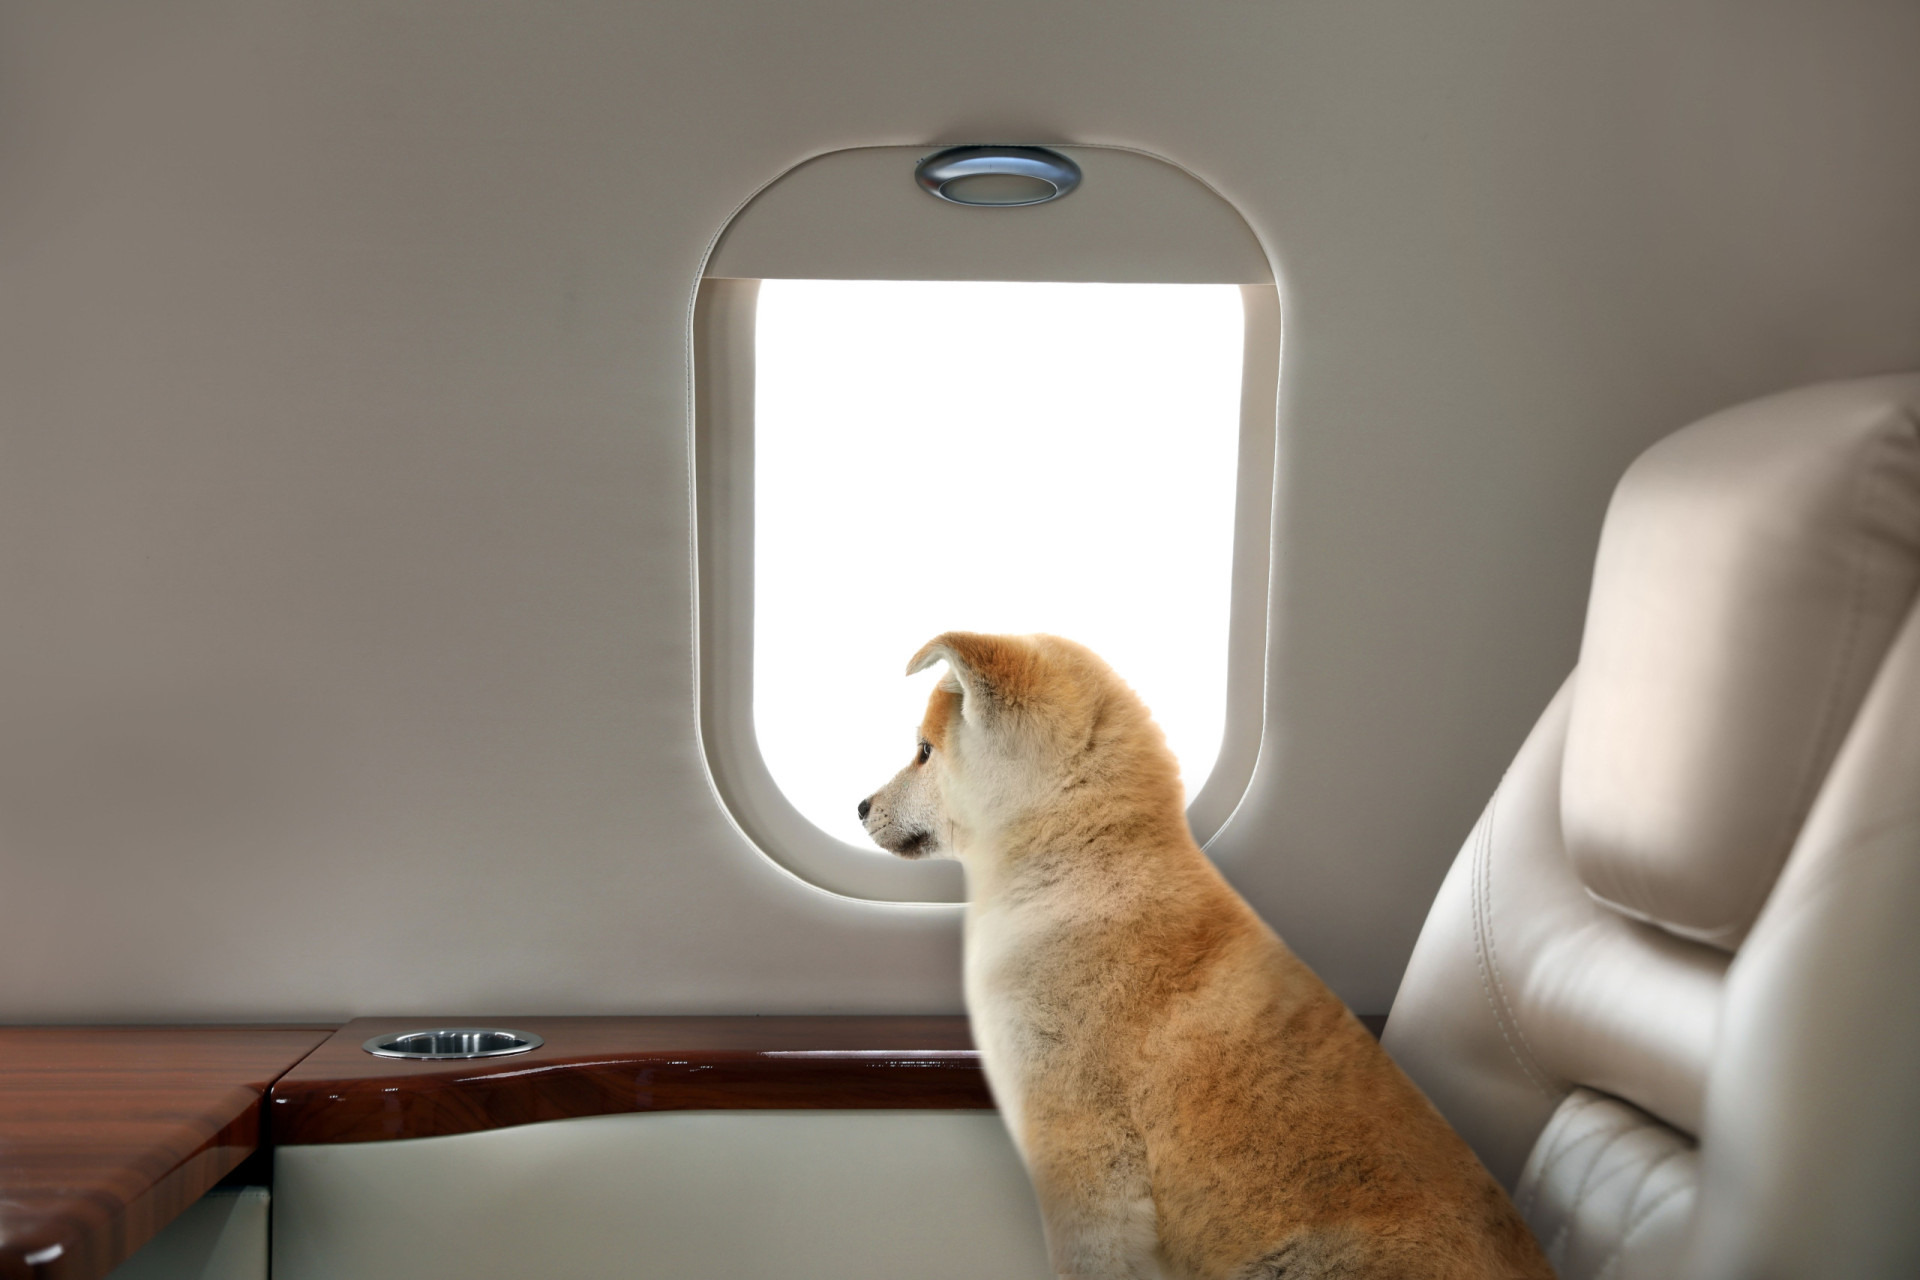 <p>Bark Air, a luxury airline for dogs (and their owners), made its first flight. The inaugural trip took place on Thursday, May 23, between New York and Los Angeles, in the USA, and was documented by the company on Instagram.</p> <p>"At this moment, at an altitude of 30,000 feet, there is a flight full of dogs," revealed Bark Air at the time, adding that on these flights "dogs are the main priority."</p> <p>The tickets were sold out, according to Bark's booking site, which states that the experience was launched to make long-distance travel more comfortable for dogs that usually do not fit in the front of passengers' seats on commercial airplanes.</p> <p>"Often, dogs are prevented from traveling, confined to a backpack, or have to endure the stress of traveling in the cargo hold," said the company when it announced the flights last April.</p> <p>(Illustrative image)</p><p>You may also like:<a href="https://www.starsinsider.com/n/198351?utm_source=msn.com&utm_medium=display&utm_campaign=referral_description&utm_content=719768en-us"> What's your Vedic astrological sign?</a></p>